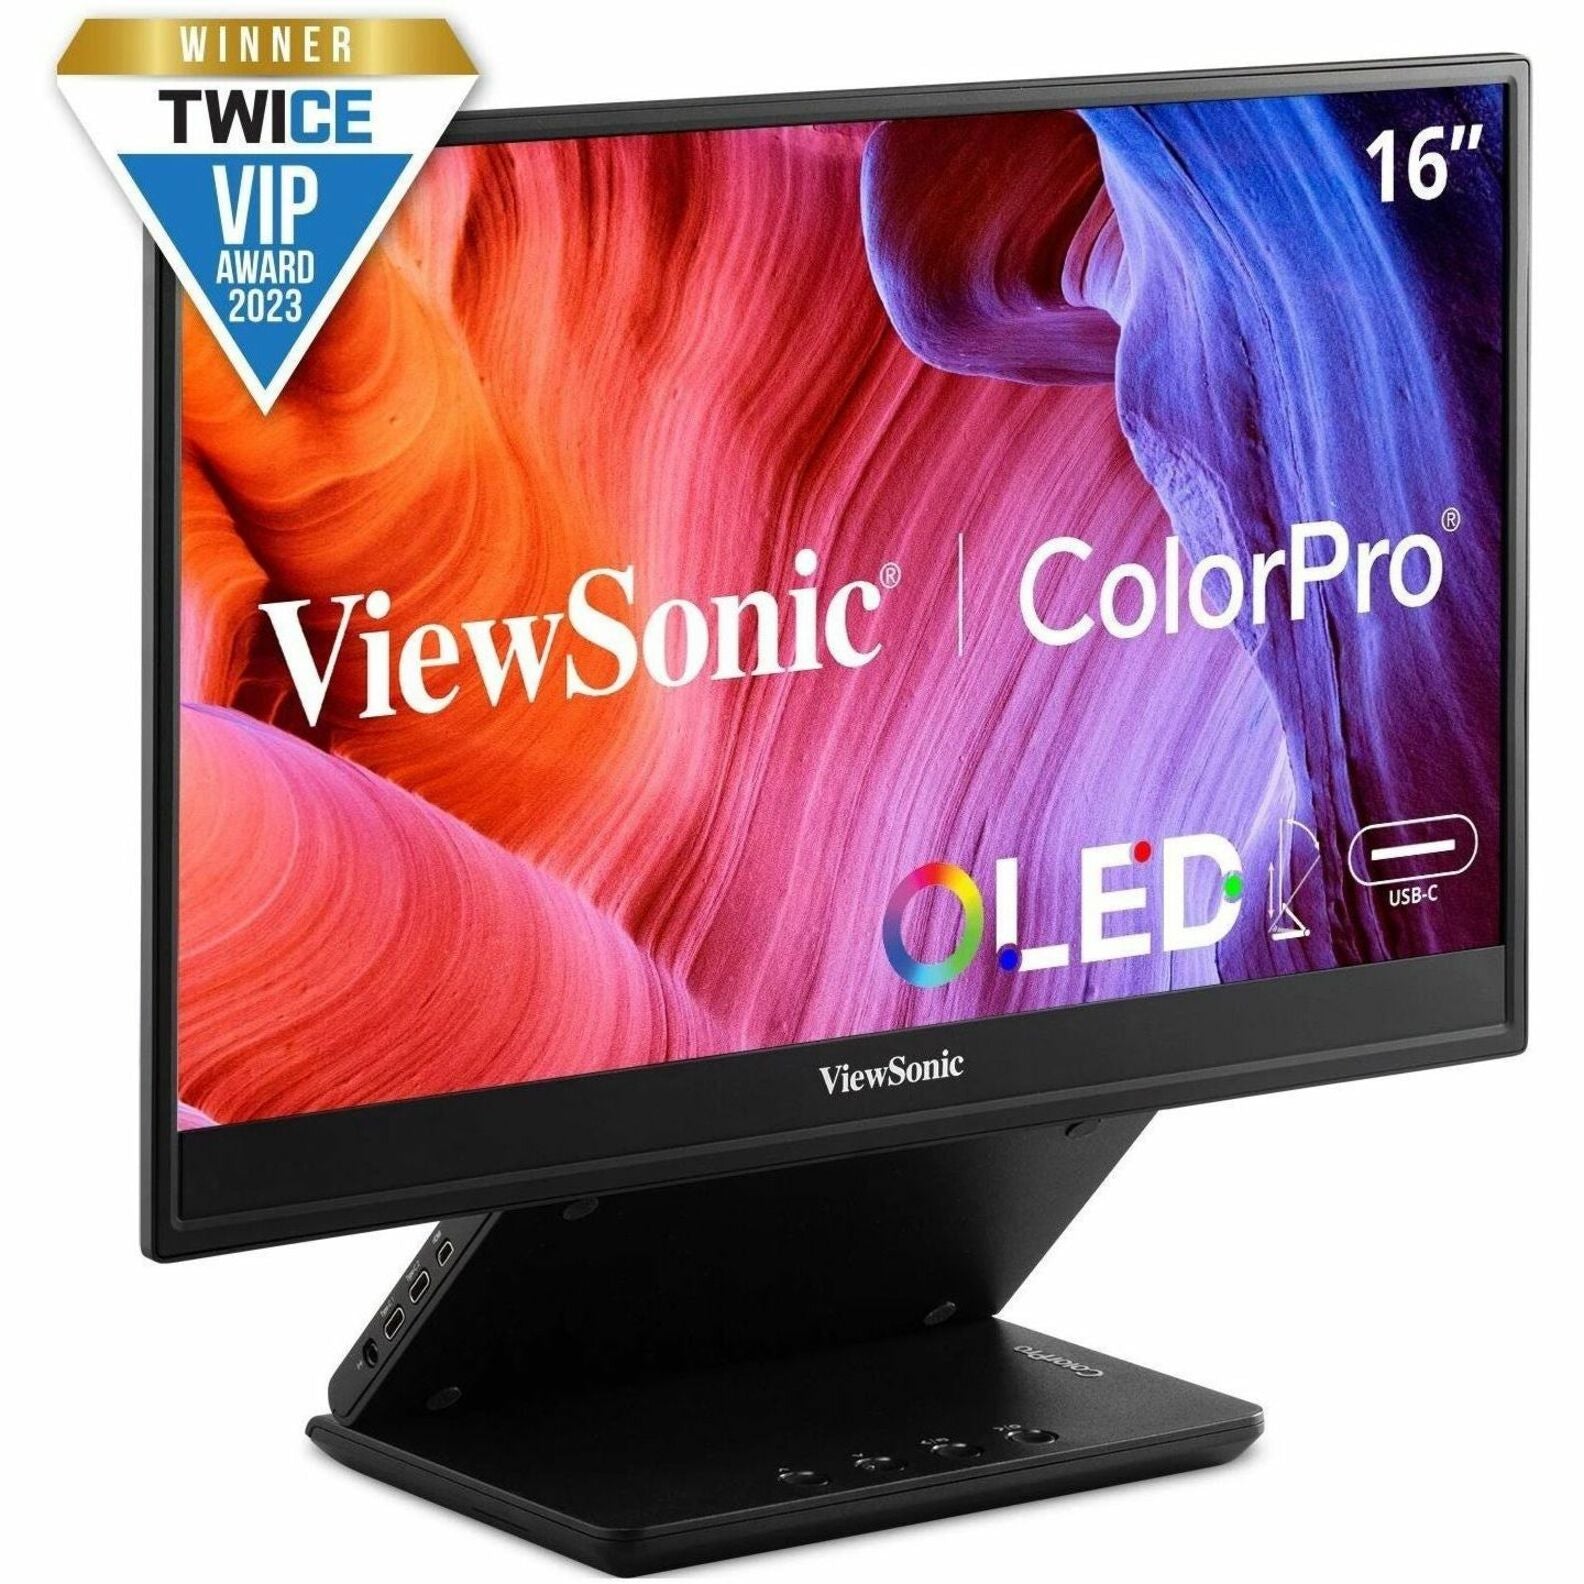 ViewSonic ColorPro VP16-OLED Widescreen OLED Monitor, 15.6 Portable 1080p with 60W USB-C and mini-HDMI, and Ergonomic Stand